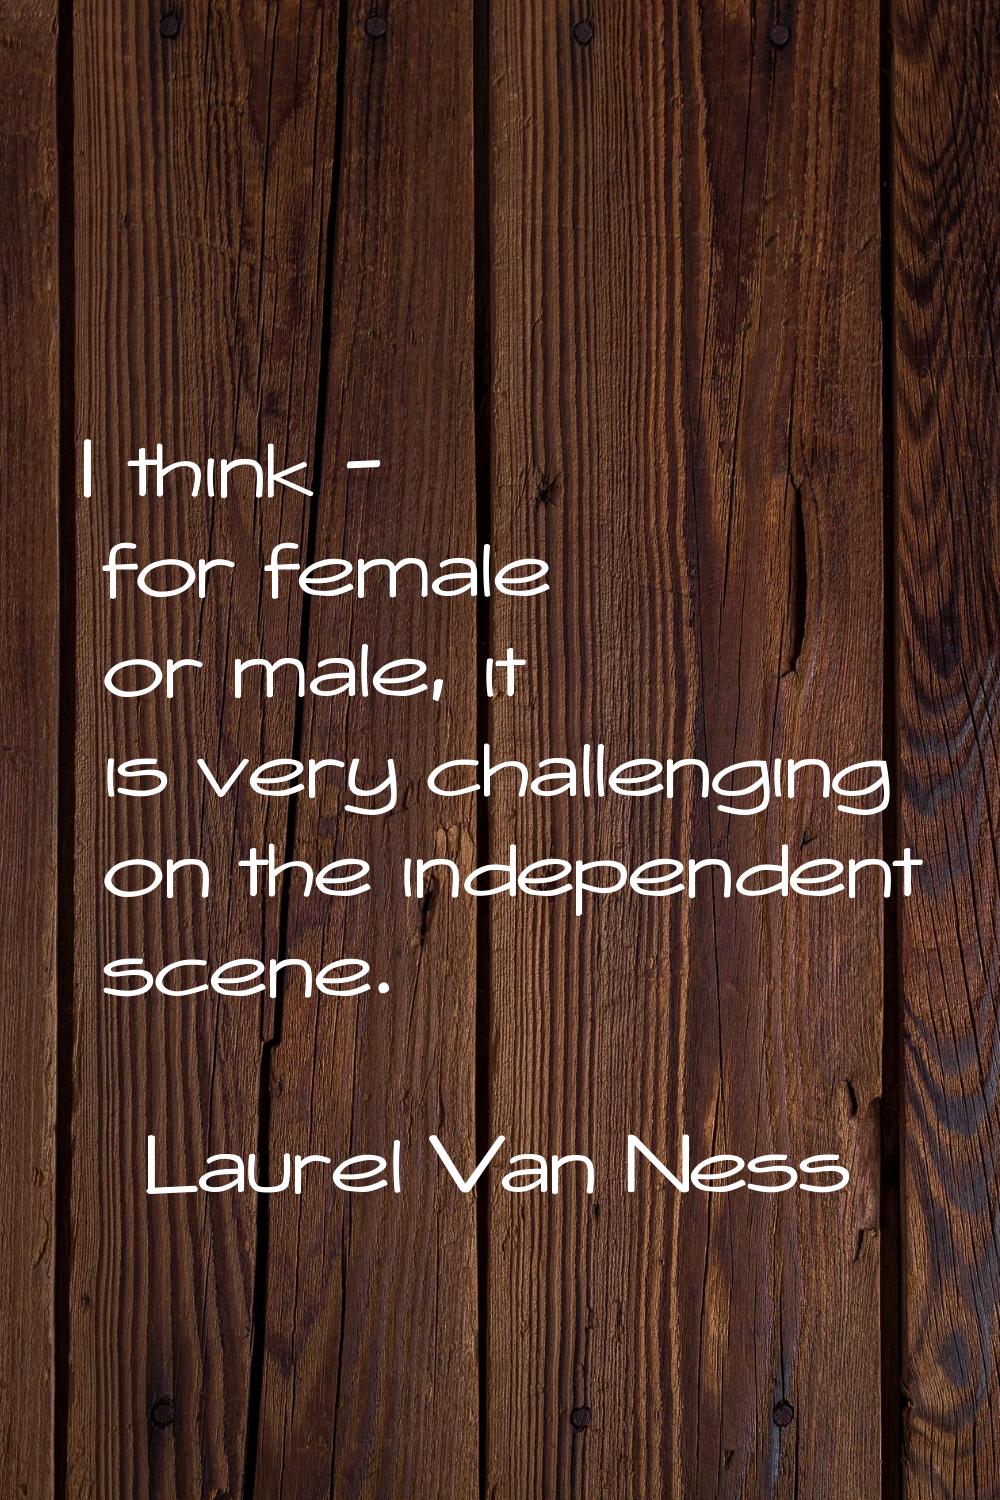 I think - for female or male, it is very challenging on the independent scene.